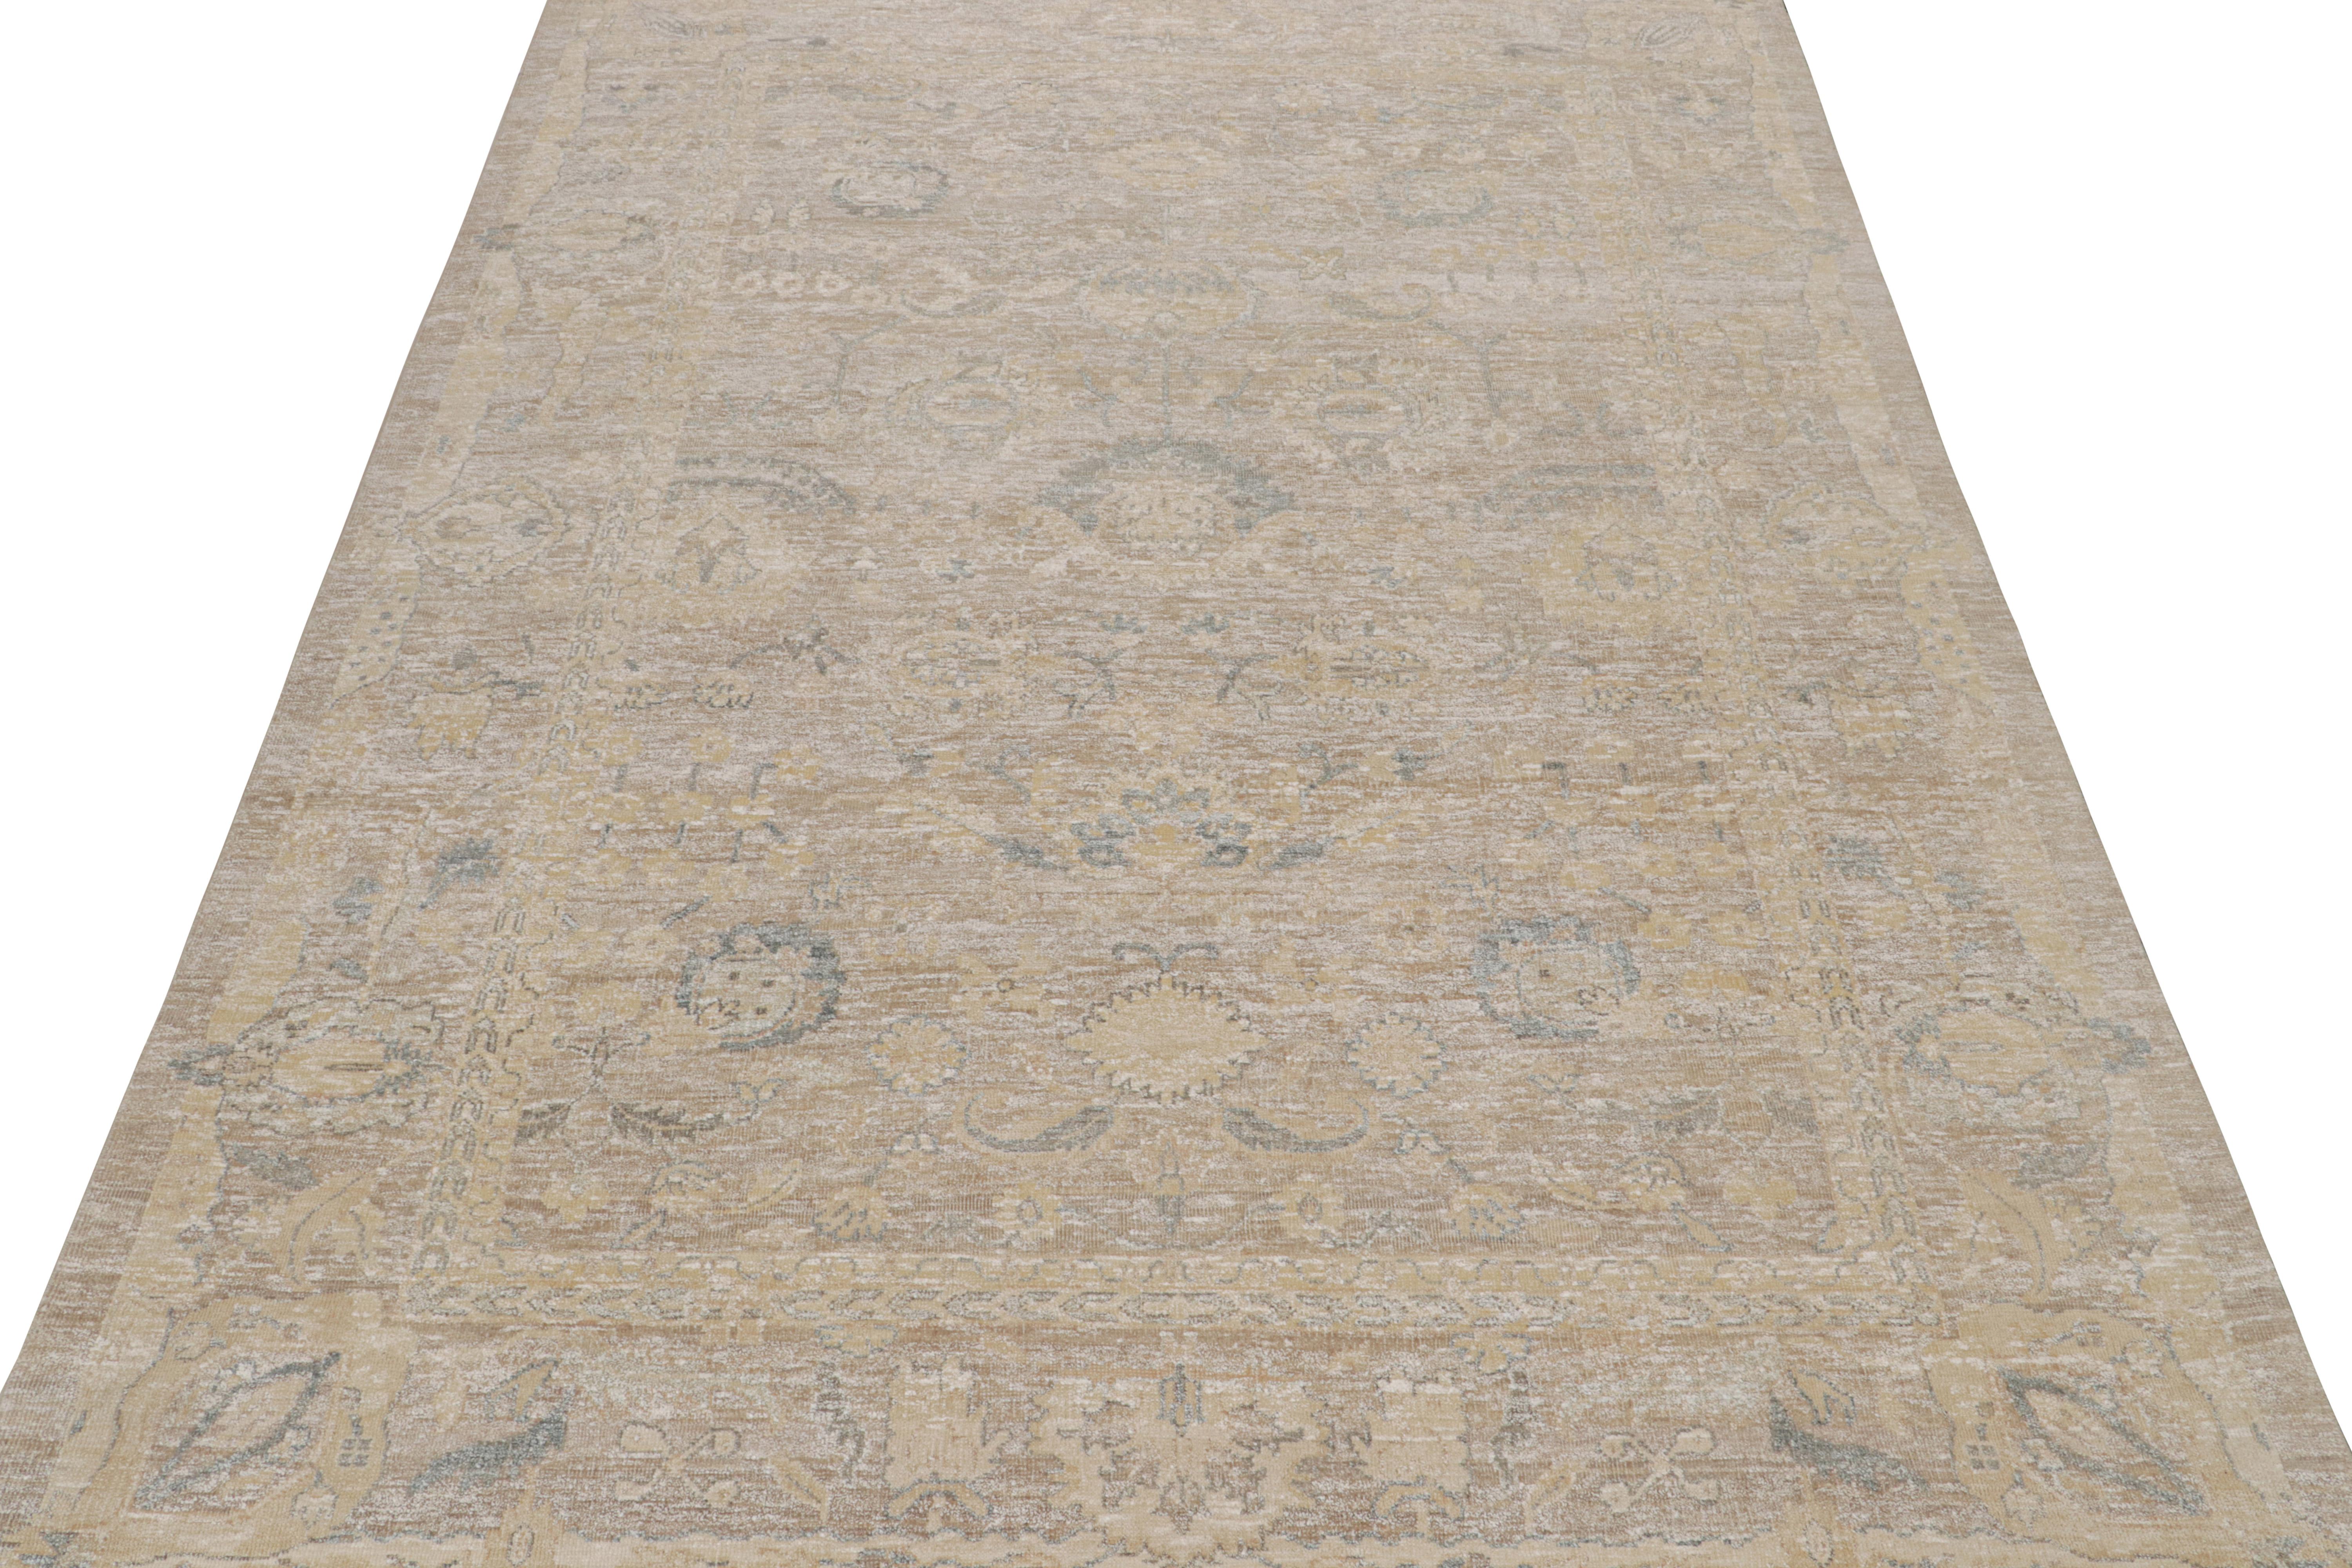 Indian Rug & Kilim’s Oushak Style Rug with Beige-Brown, Blue and Gold Floral Patterns For Sale